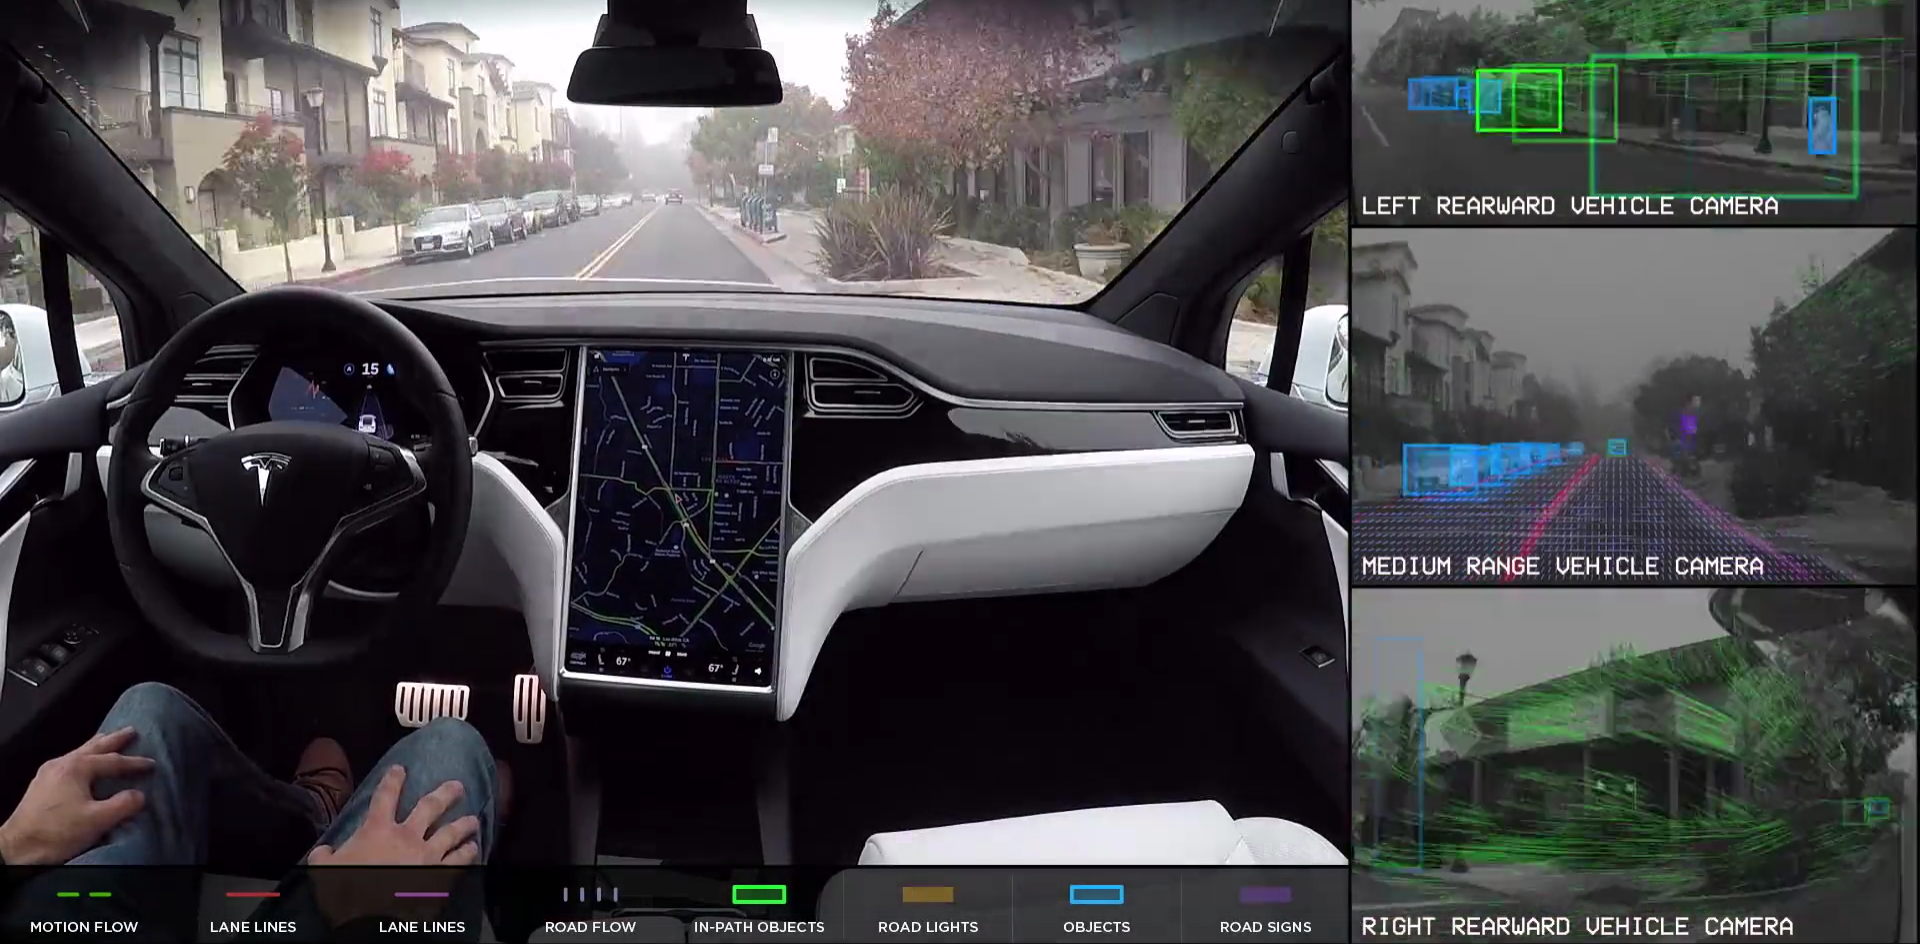 Tesla to make its own custom SoC (System on Chip) for self-driving cars  built by Samsung, report says - Electrek